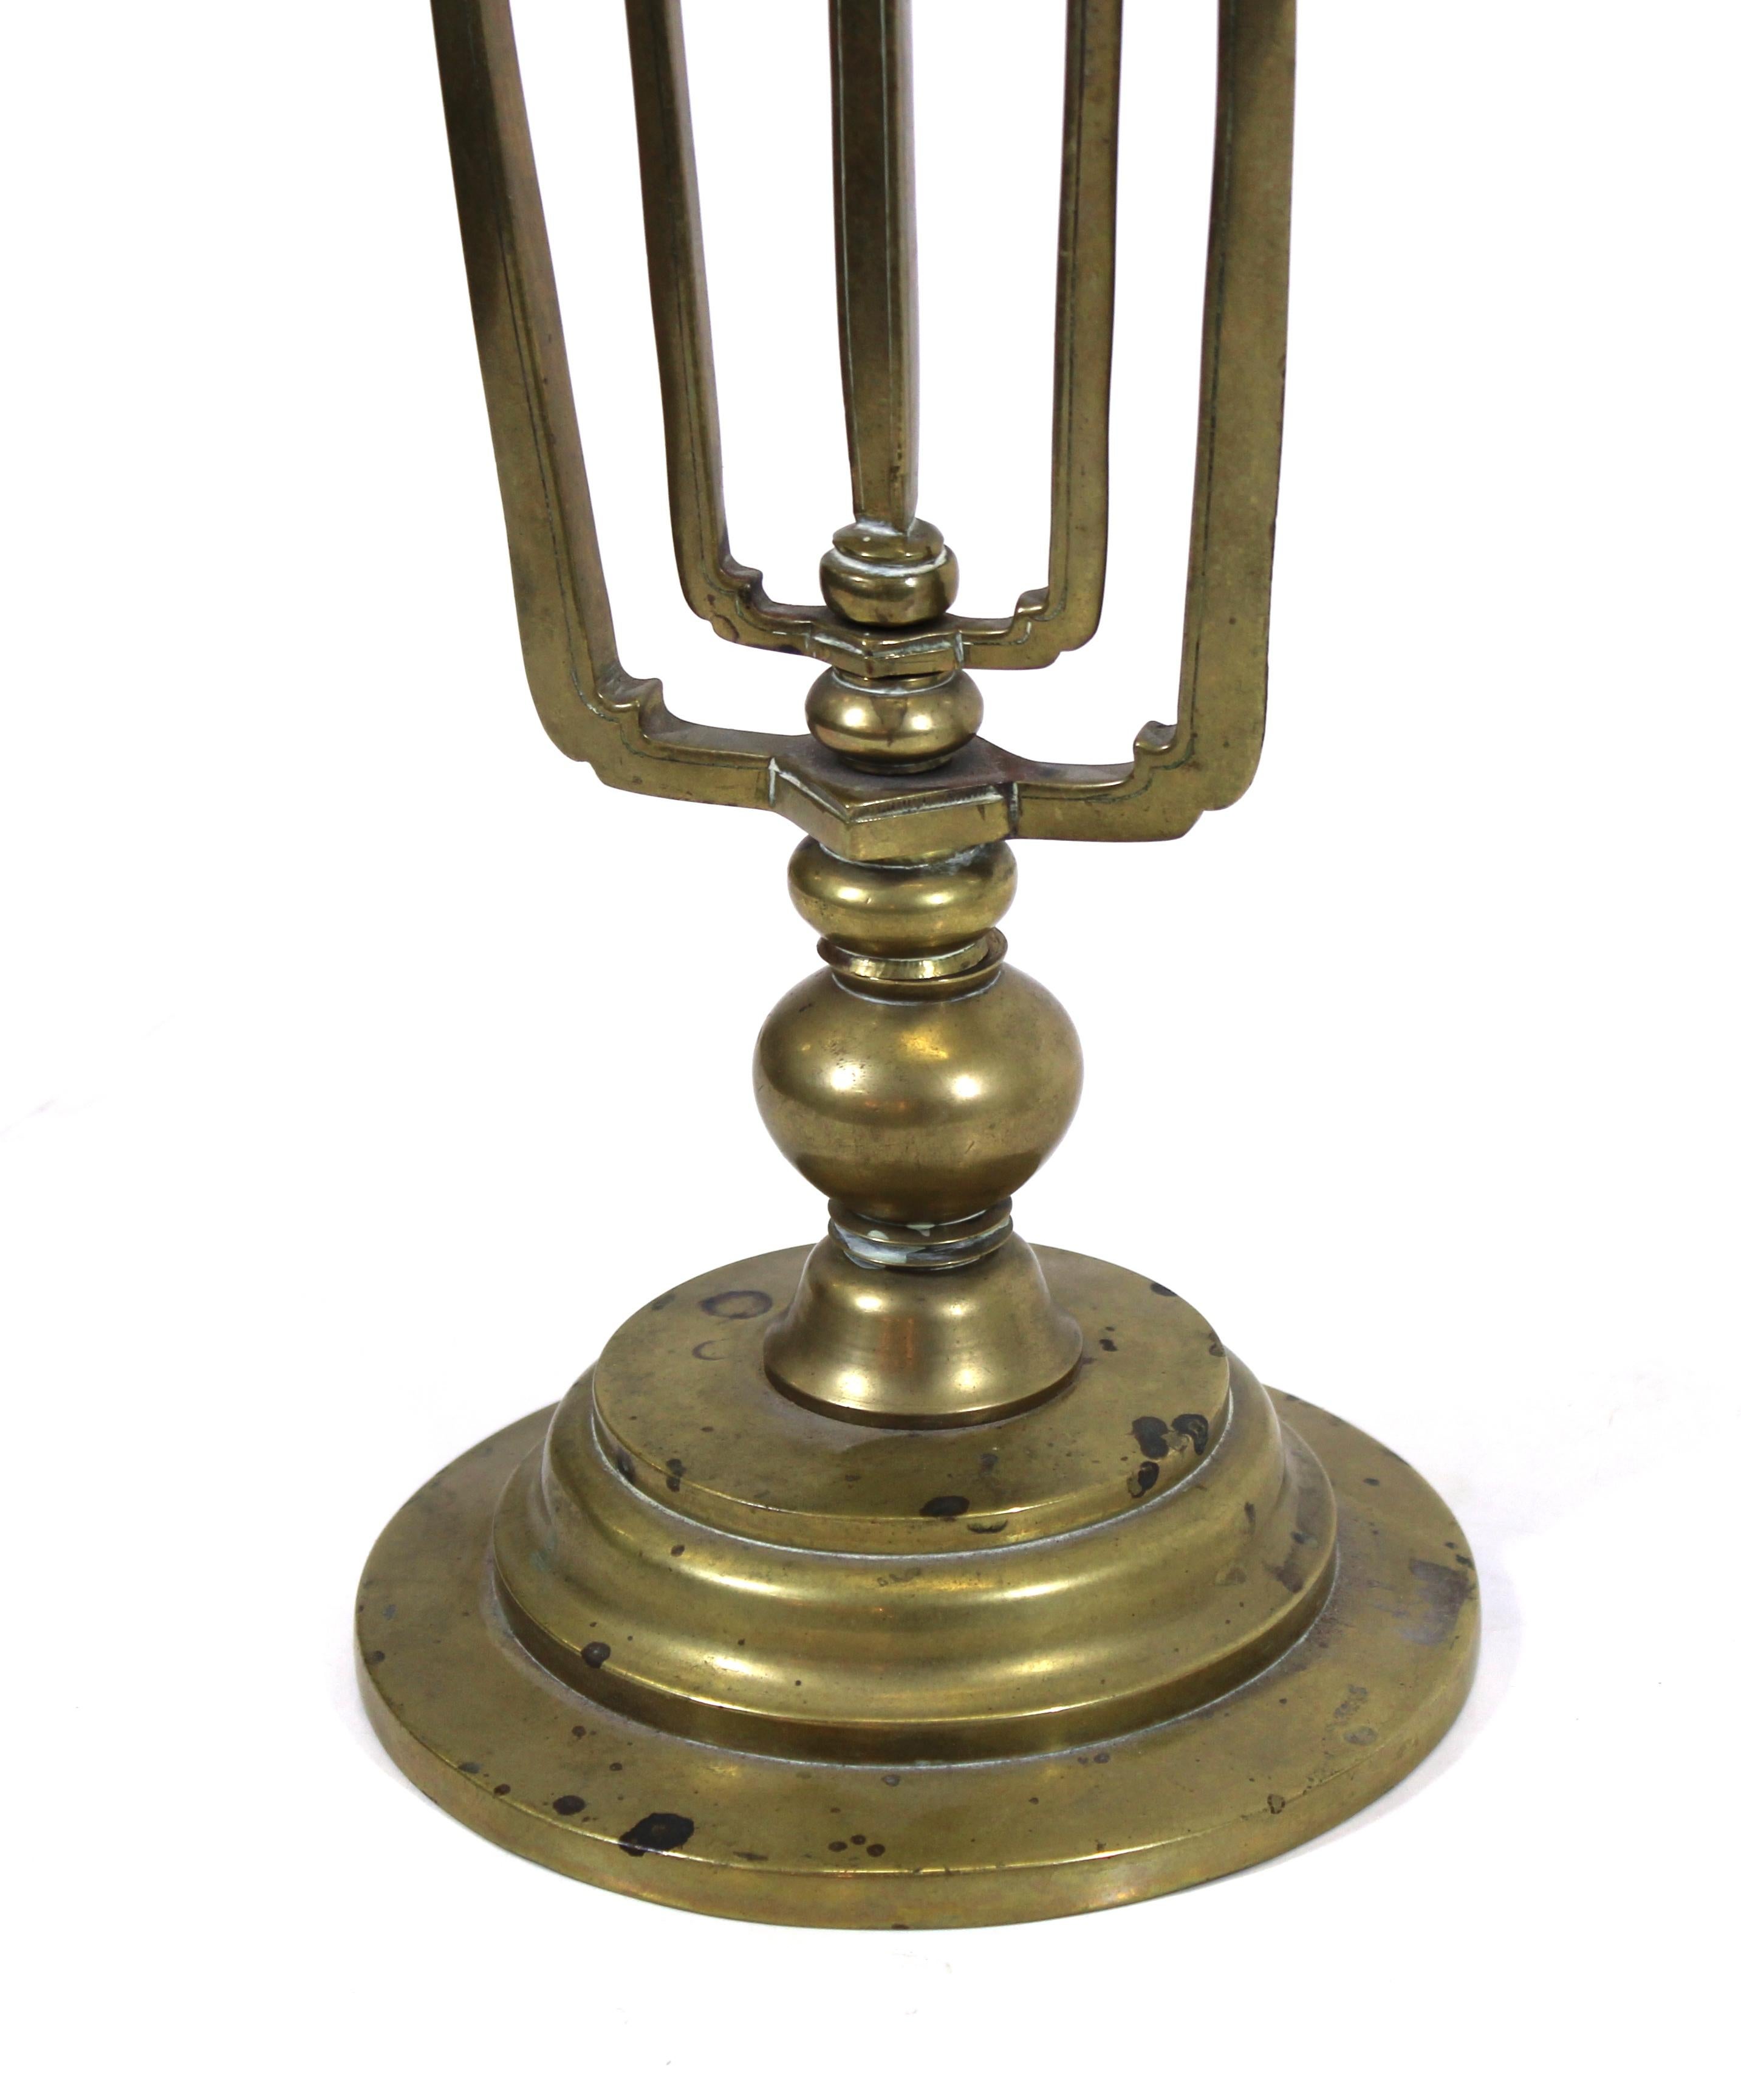 Early 20th Century German Early Modernist Peter Behrens Style Candleholders